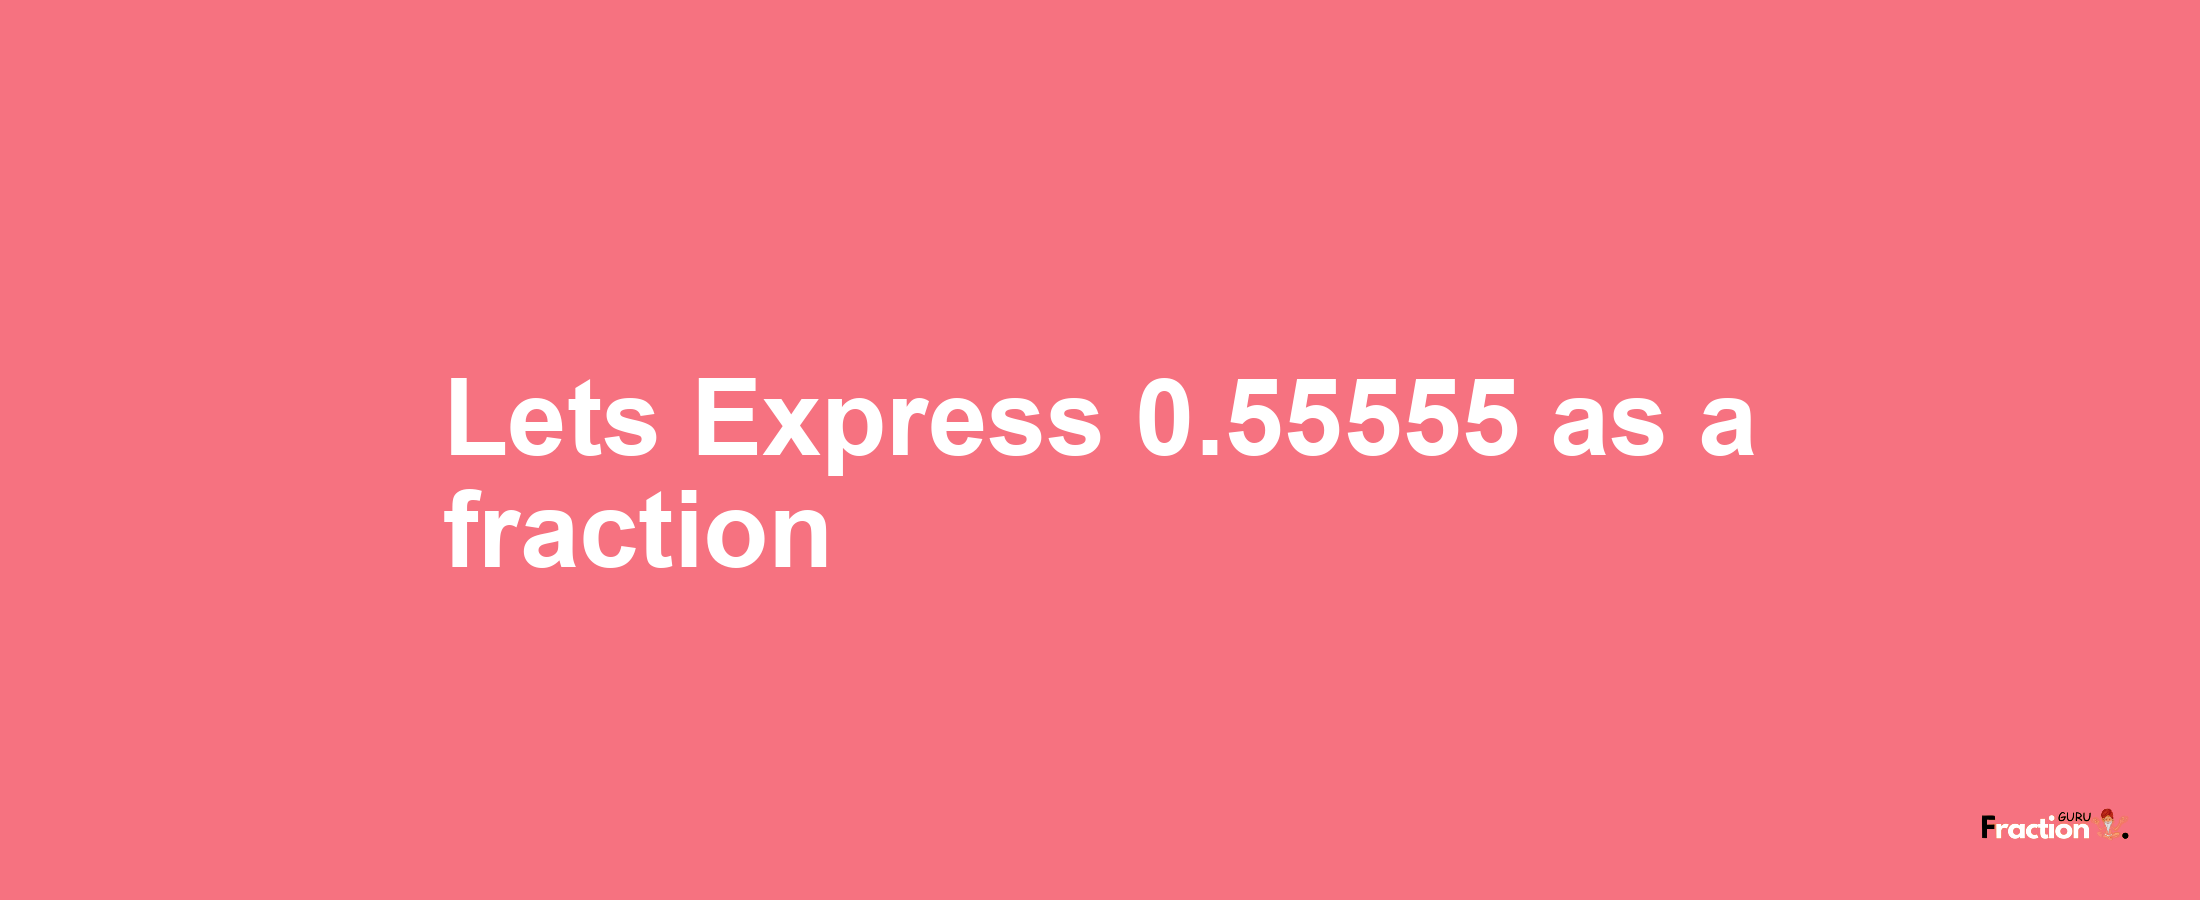 Lets Express 0.55555 as afraction